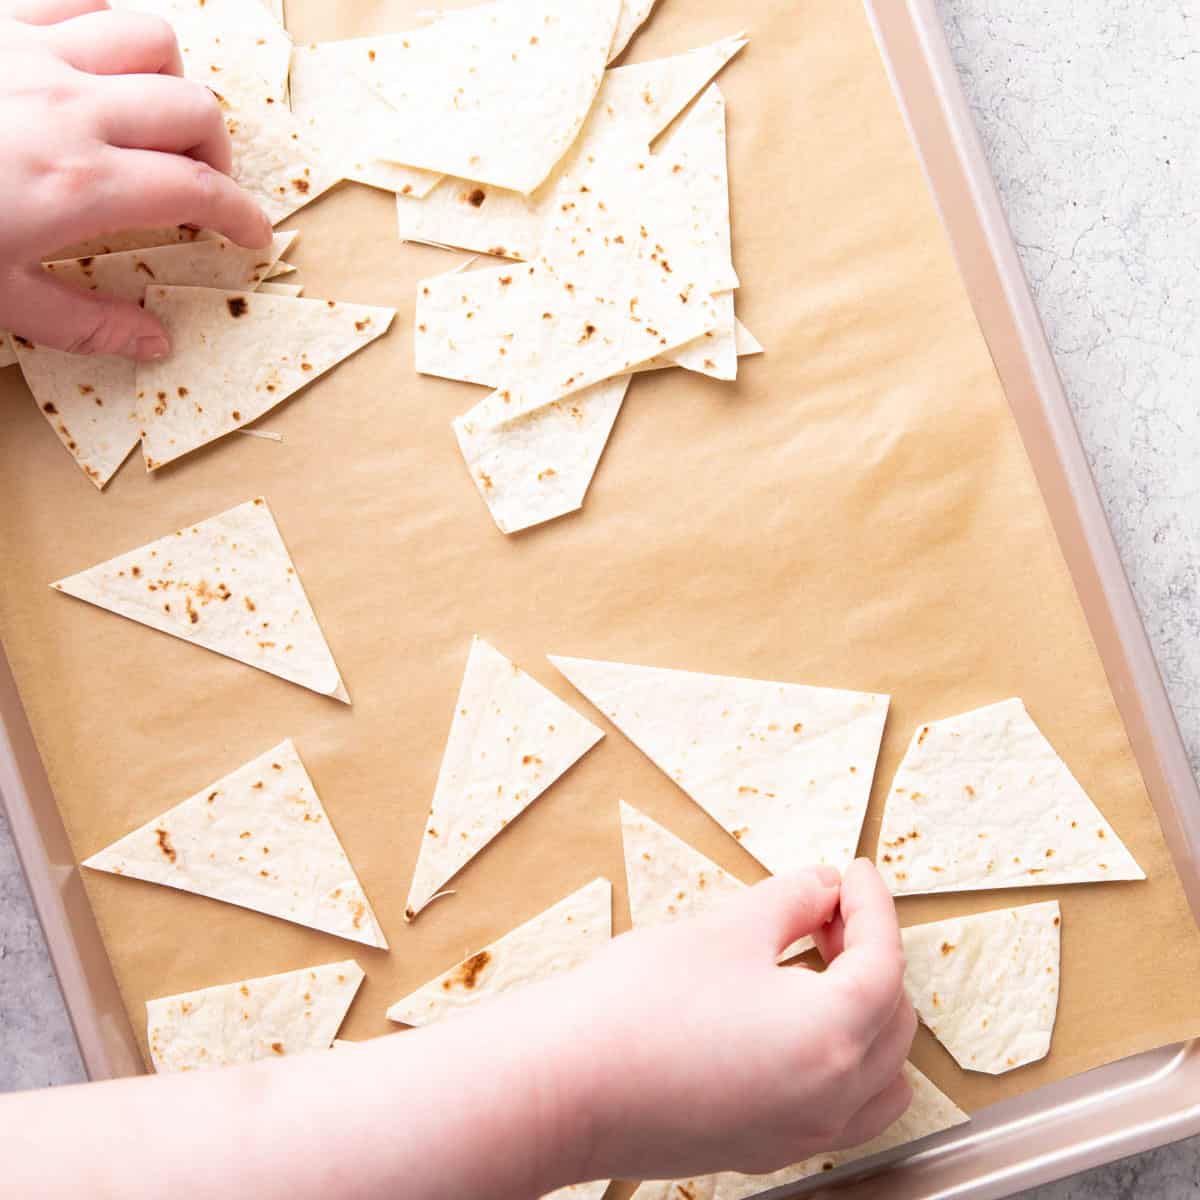 Photo showing How to Make Baked Tortilla Chips – laying tortilla chips on baking sheet